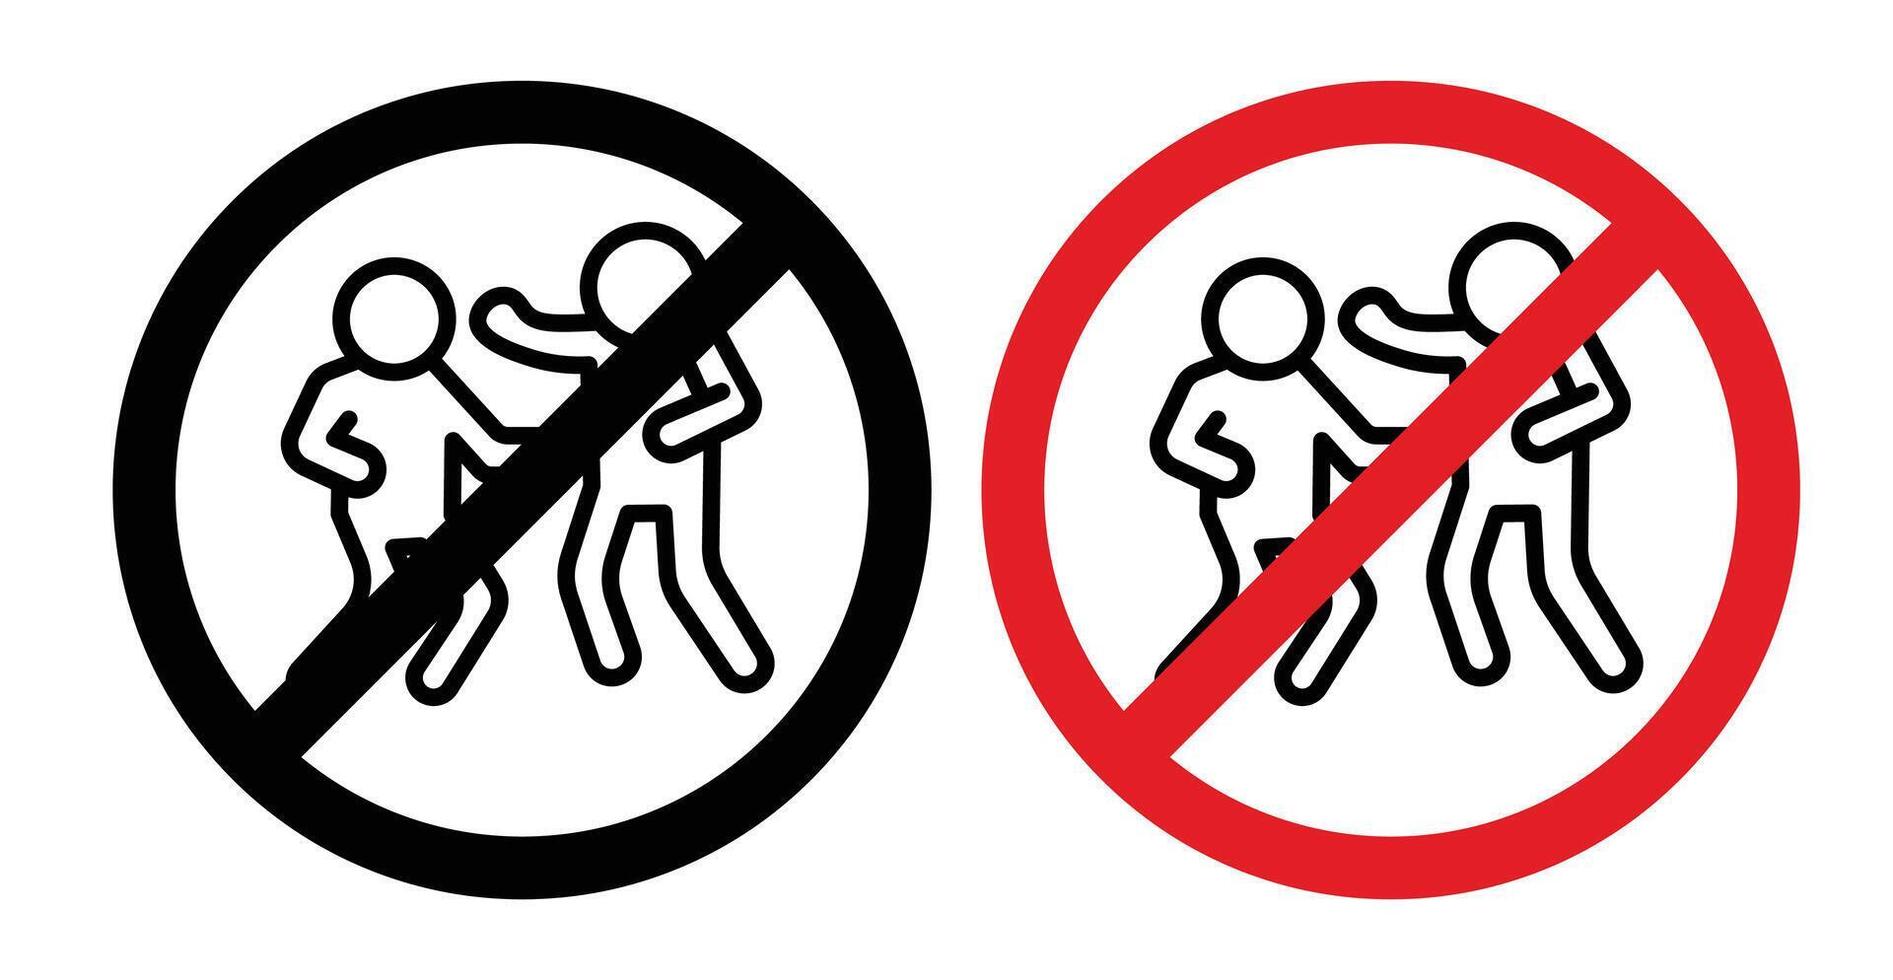 No fight sign vector